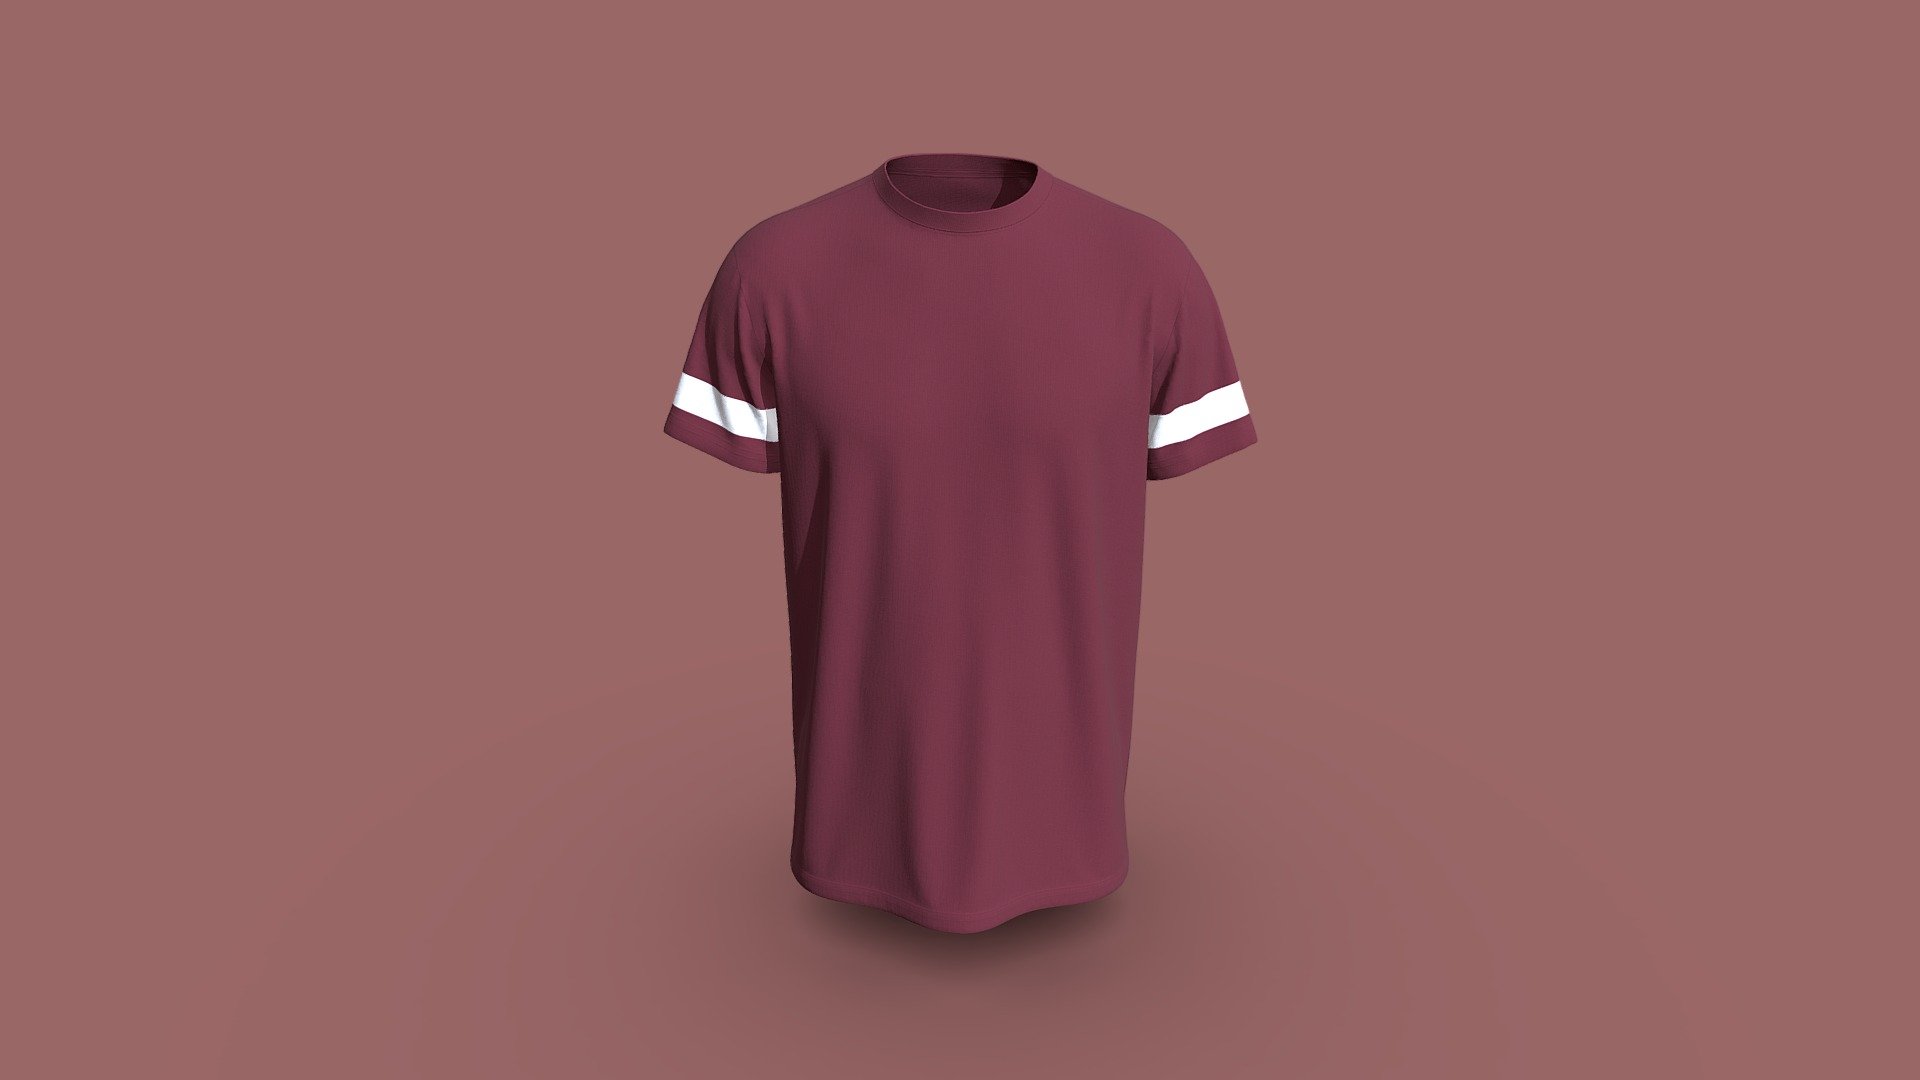 Cloth Title = T-Shirt New Design 
 
SKU = DG100209 

Category = Unisex
 
Product Type = T-Shirt 

Cloth Length = Regular
 
Body Fit = Loose Fit
 
Occasion = Casual 
 
Sleeve Style = Set In Sleeve
  

Our Services:

3D Apparel Design.

OBJ,FBX,GLTF Making with High/Low Poly.

Fabric Digitalization.

Mockup making.

3D Teck Pack.

Pattern Making.

2D Illustration.

Cloth Animation and 360 Spin Video.


Contact us:- 

Email: info@digitalfashionwear.com 

Website: https://digitalfashionwear.com 


We designed all the types of cloth specially focused on product visualization, e-commerce, fitting, and production. 

We will design: 

T-shirts 

Polo shirts 

Hoodies 

Sweatshirt 

Jackets 

Shirts 

TankTops 

Trousers 

Bras 

Underwear 

Blazer 

Aprons 

Leggings 

and All Fashion items. 





Our goal is to make sure what we provide you, meets your demand 3d model